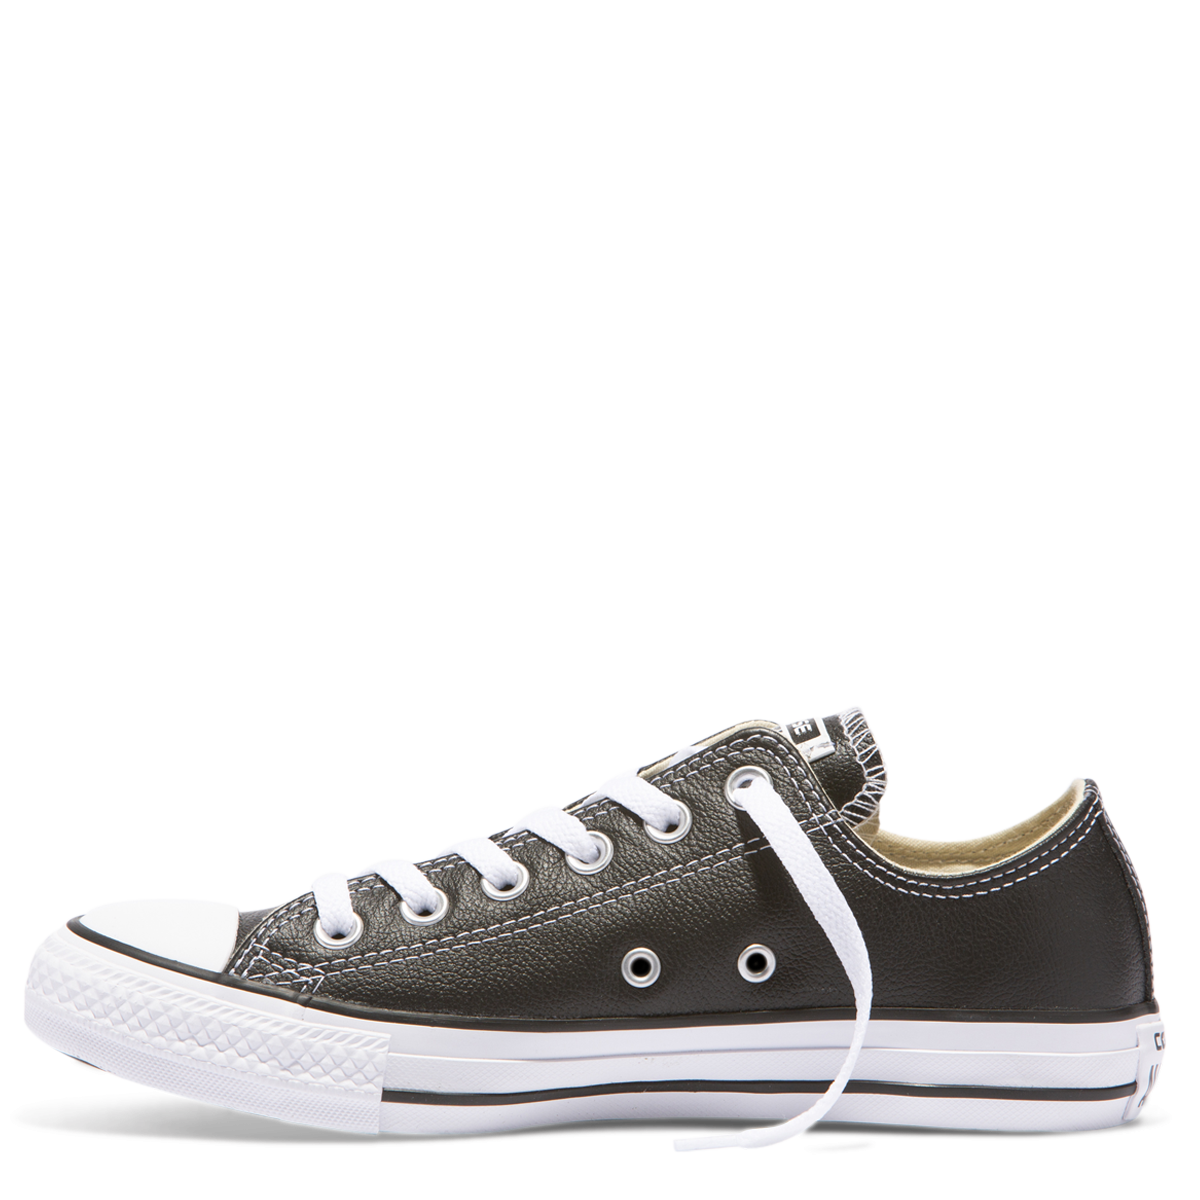 CHUCK TAYLOR ALL STAR LEATHER LOW